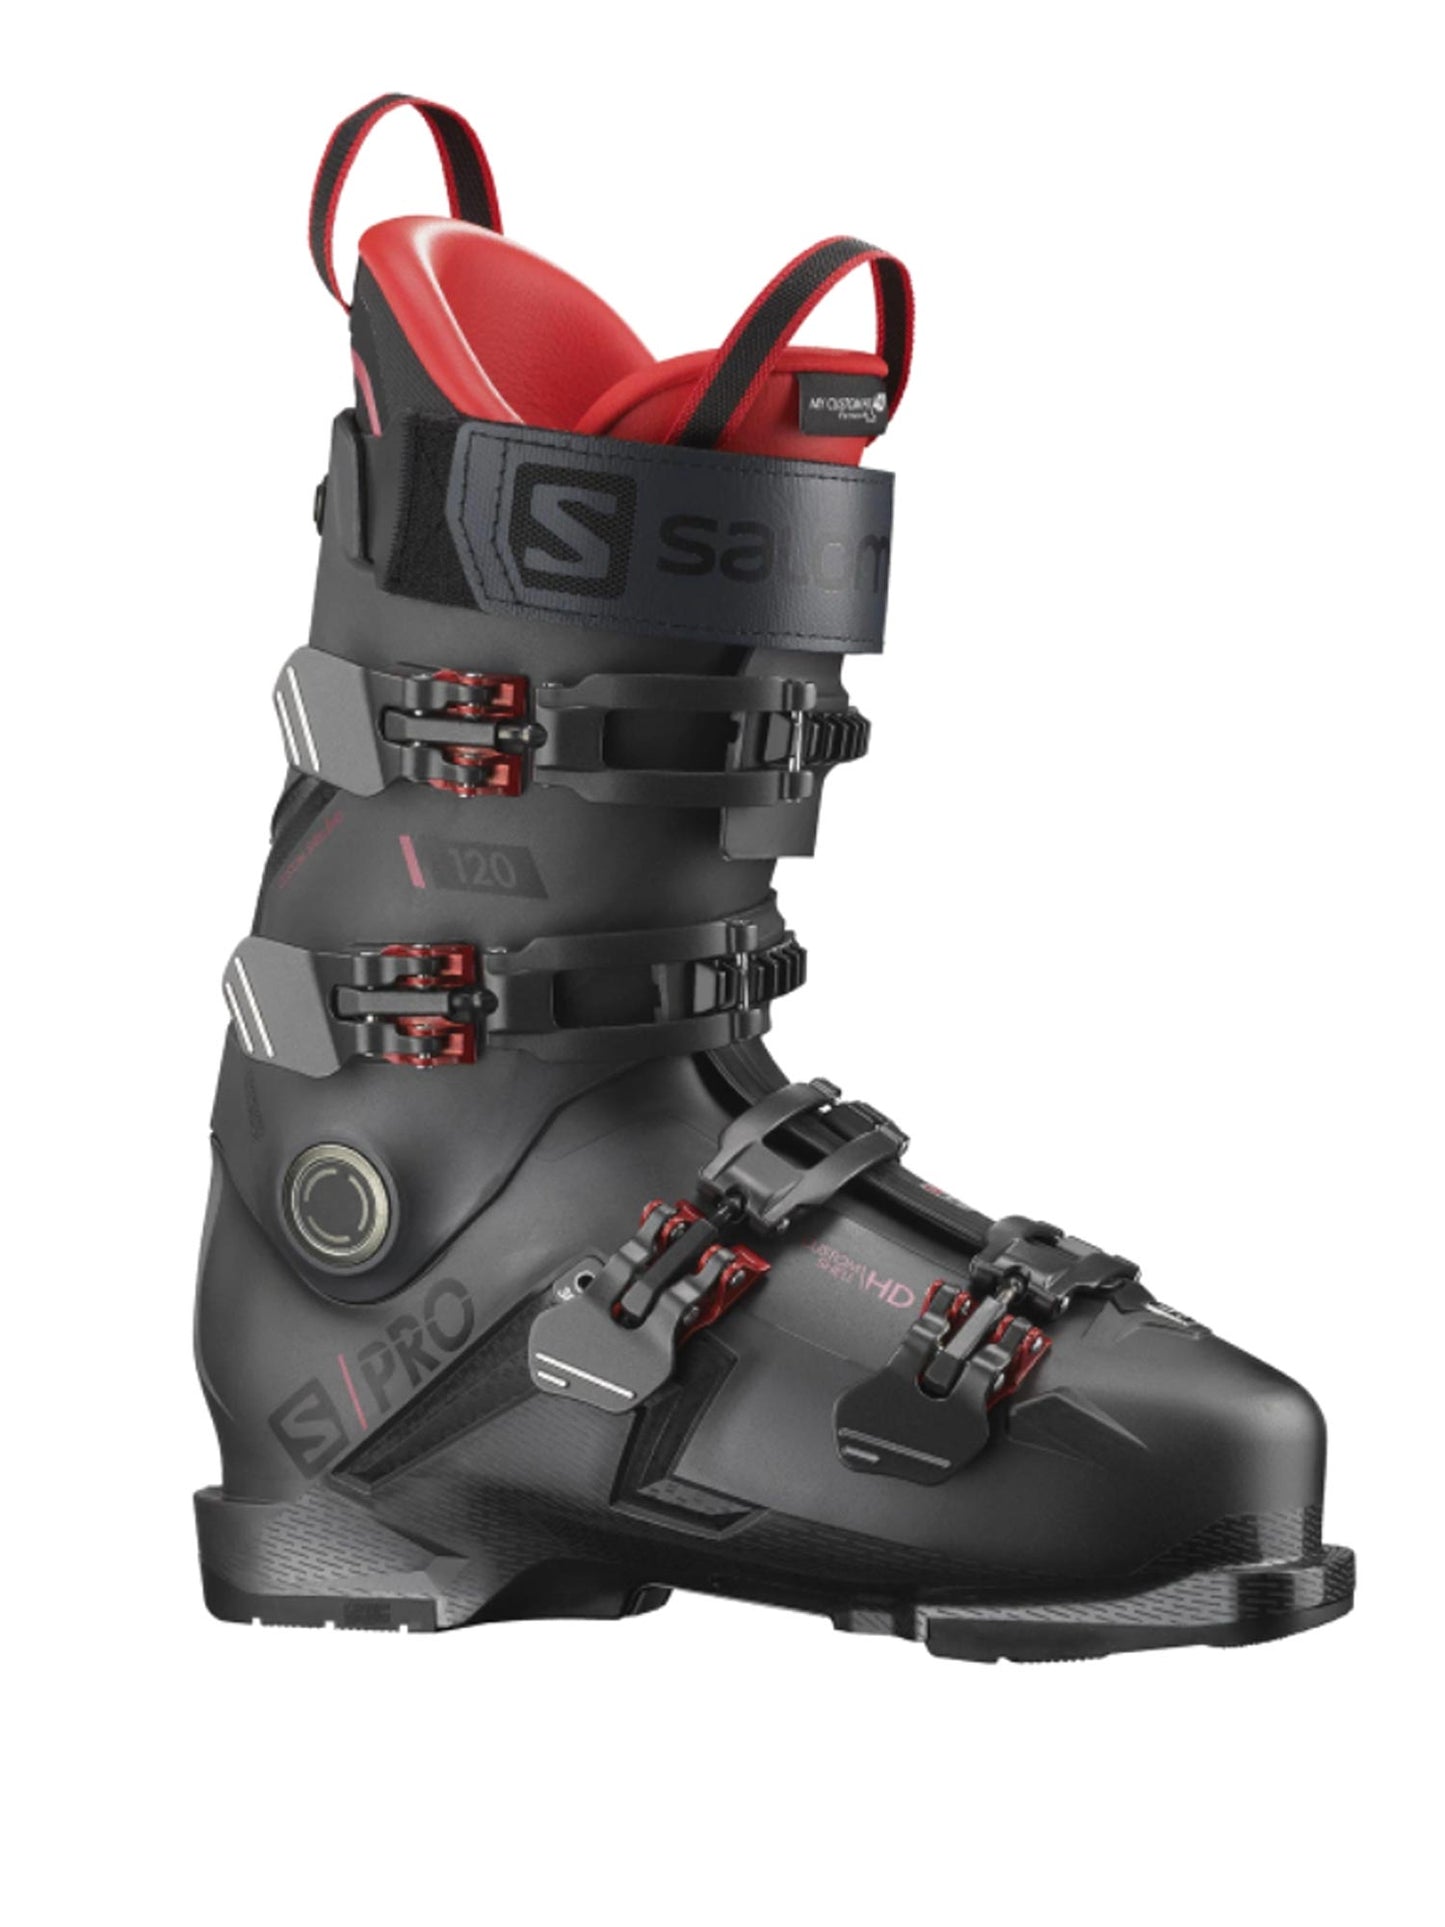 men's Salomon ski boots, black with red accents